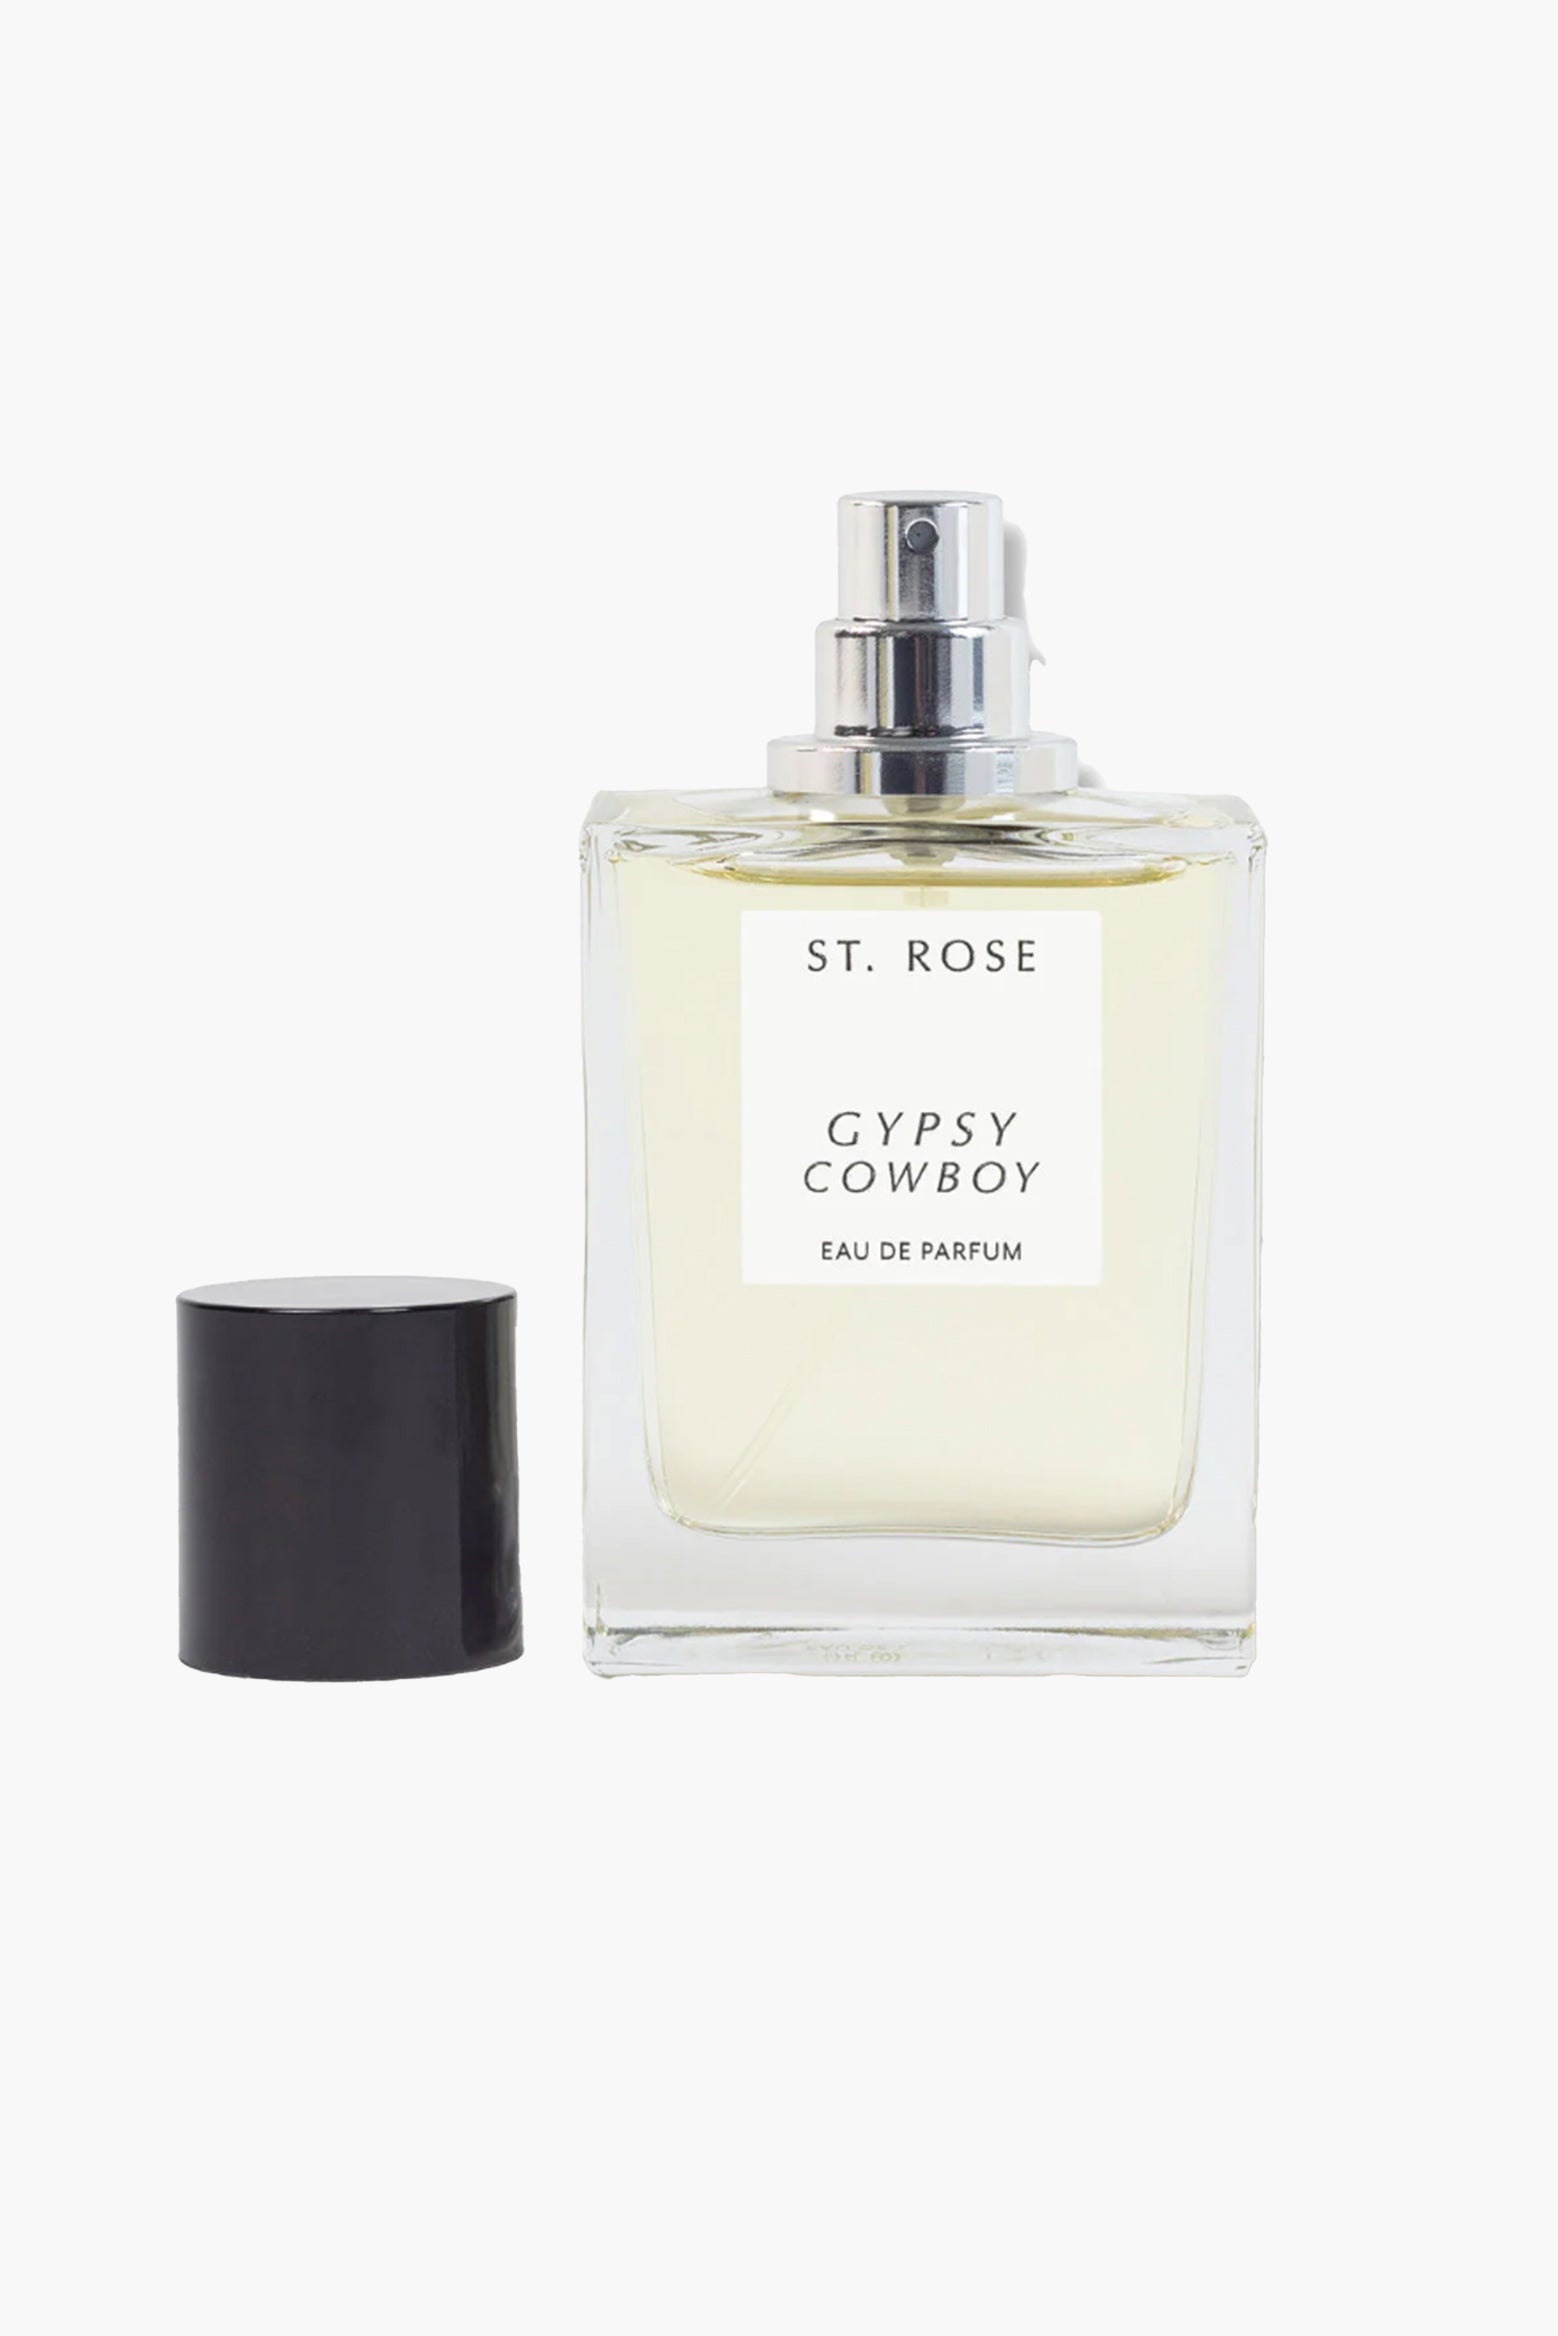 St Rose Gypsy Cowboy Parfum available at The New Trend Australia.